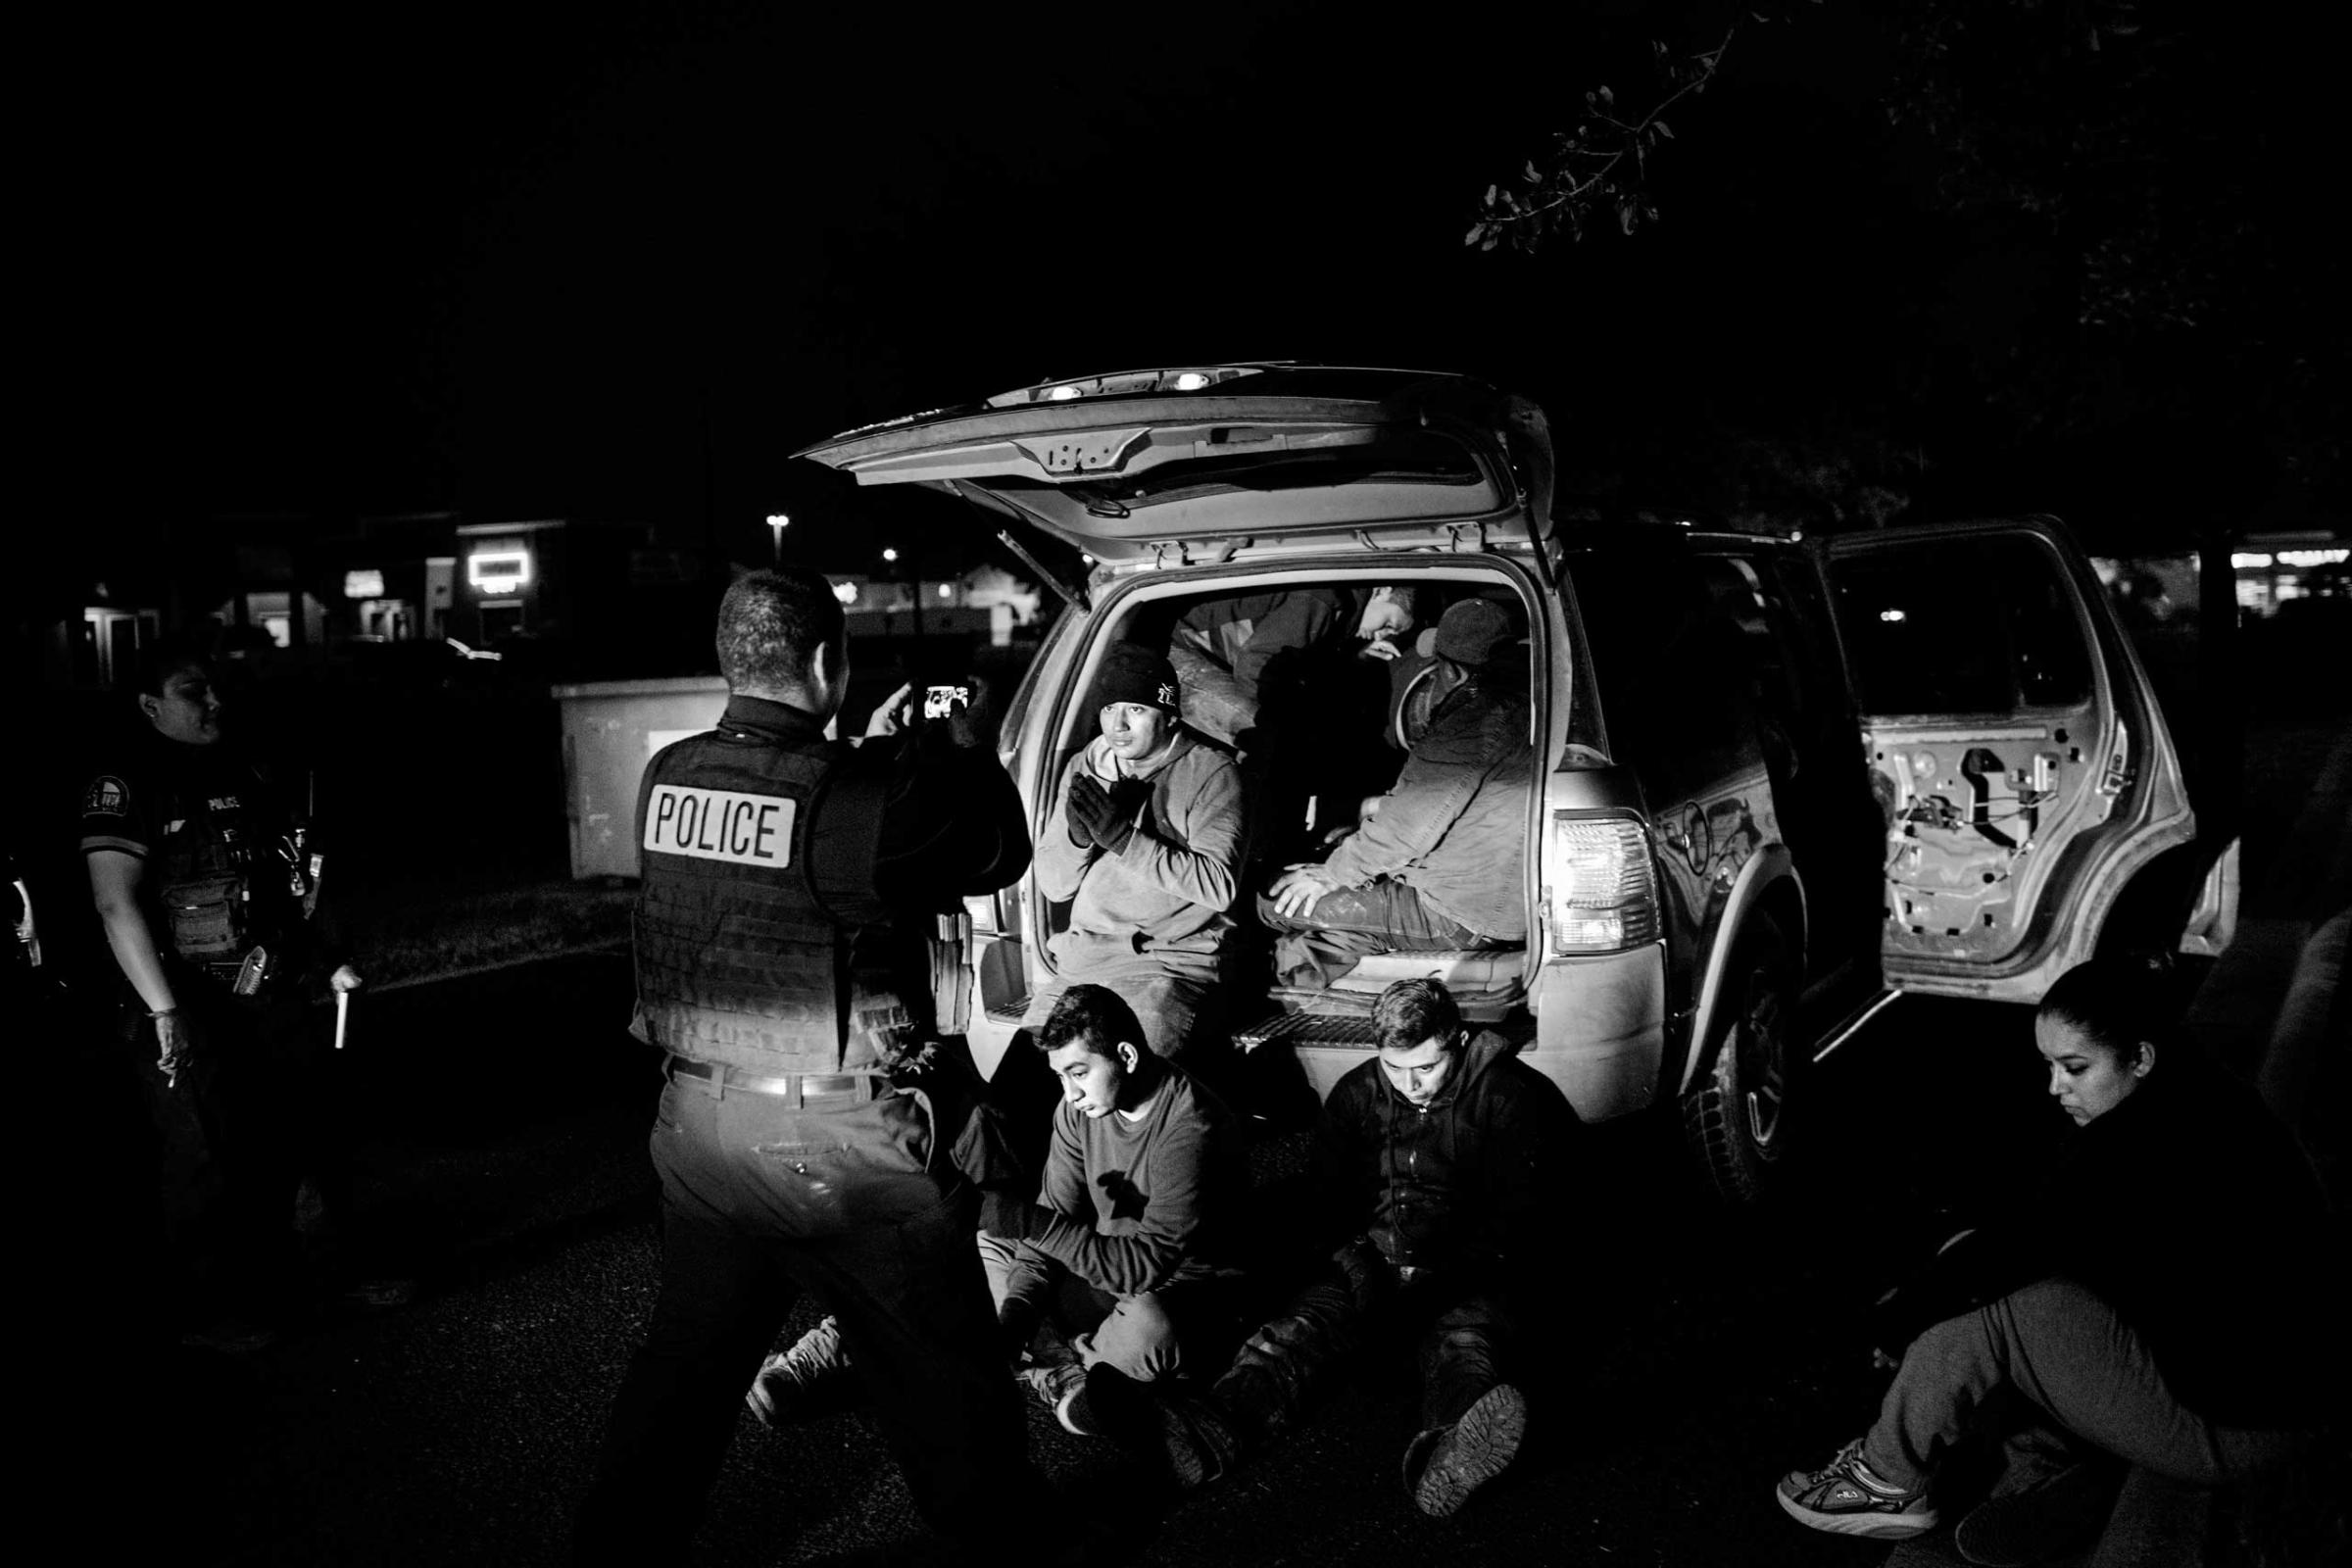 A vehicle transporting 12 undocumented migrants is pulled over in La Joya near MCallen, Texas on the US-Mexico border. Photo by Katie Orlinsky.